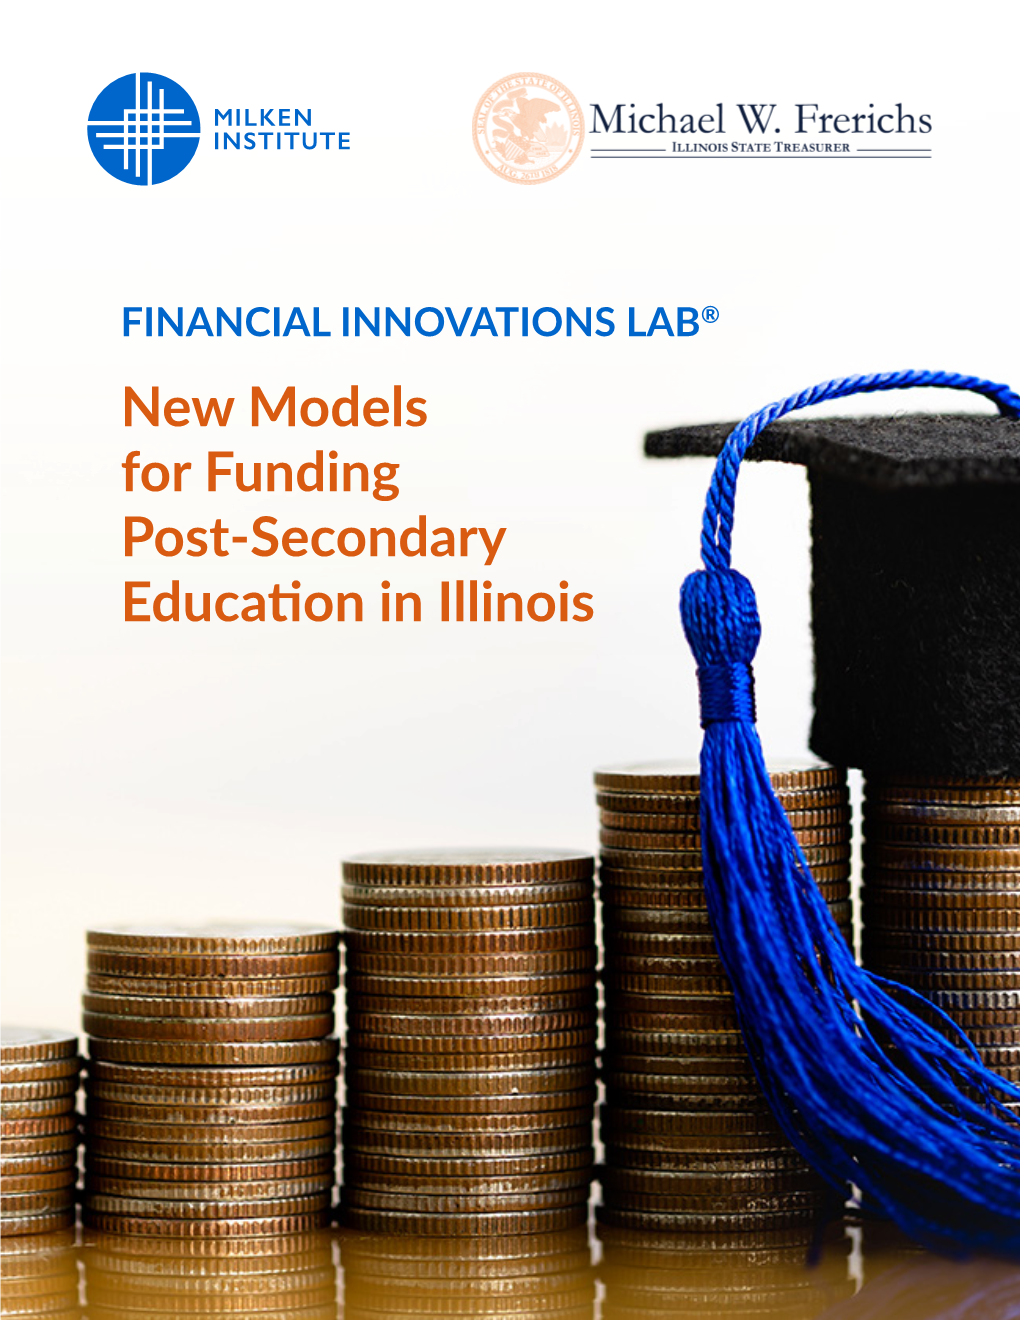 New Models for Funding Post-Secondary Education in Illinois About the Milken Institute